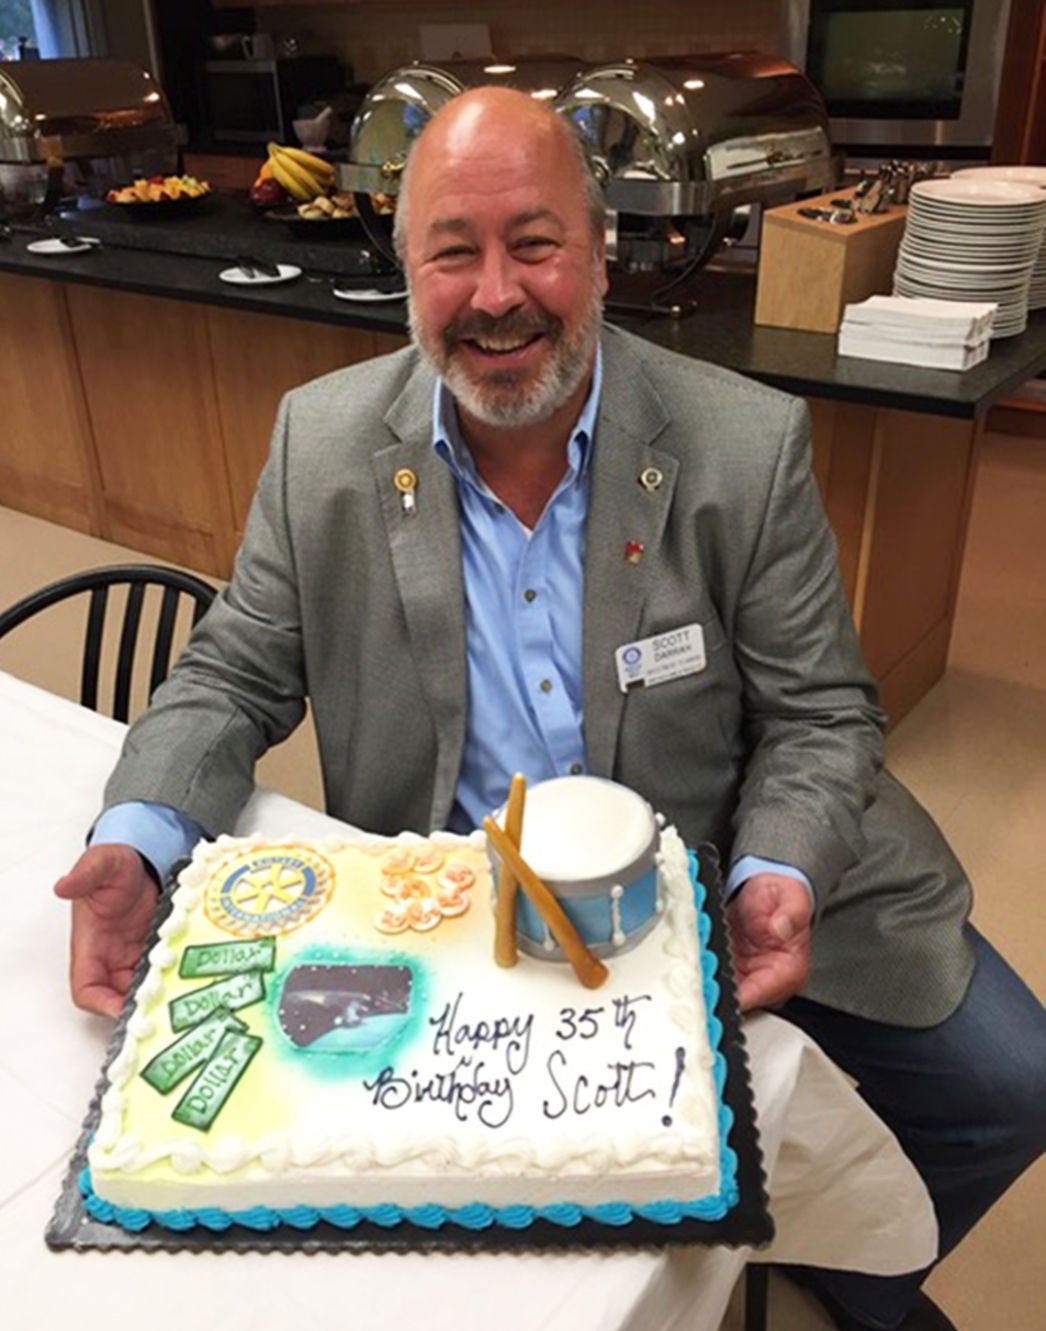 Robert "Scott" Darrah cracks a smile at a Rotary Club event while posing with a birthday cake presented in his honor. The longtime Rotarian died in early November at age 57 as a result of COVID-19 complications.